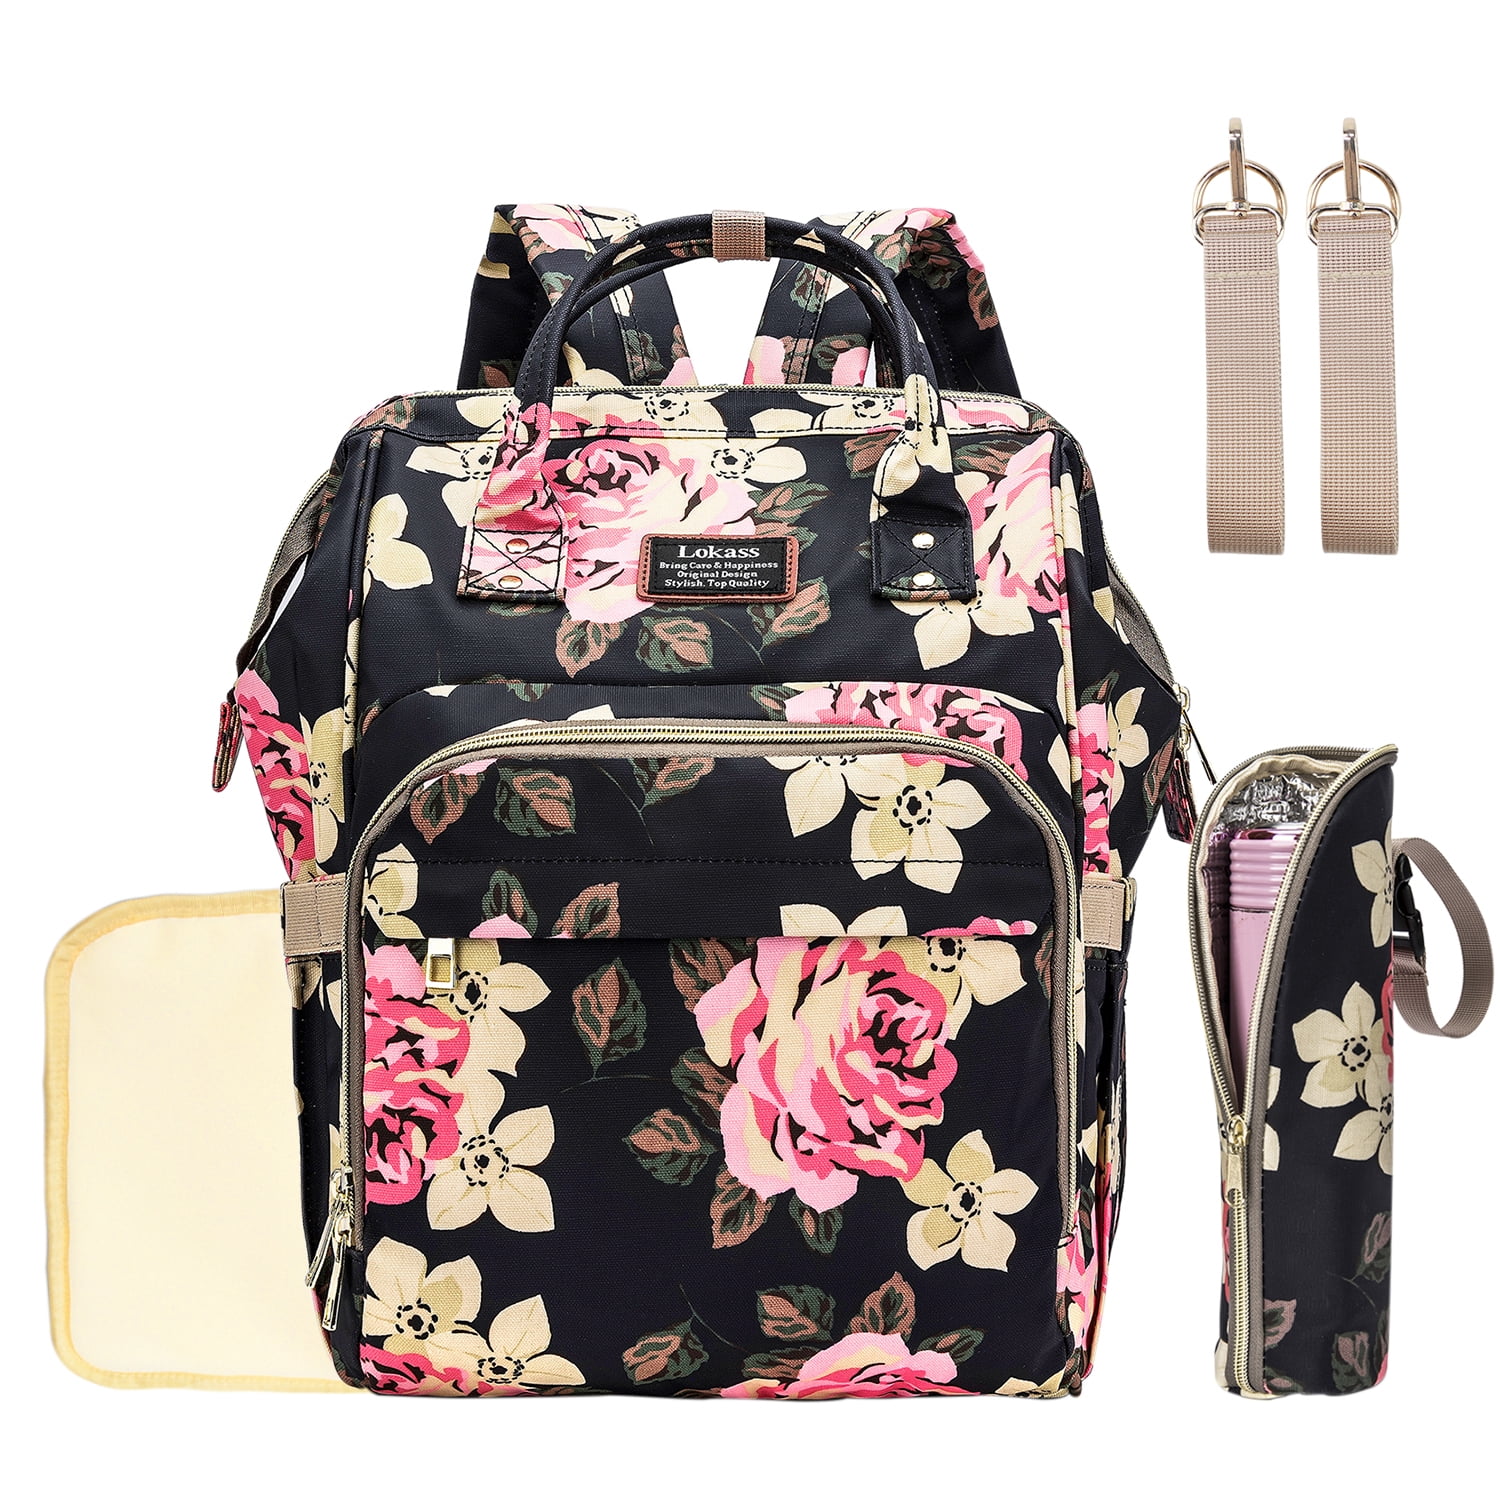 LOKASS Diaper Bag Backpack Floral Baby Bag Water-resistant Baby Nappy ...